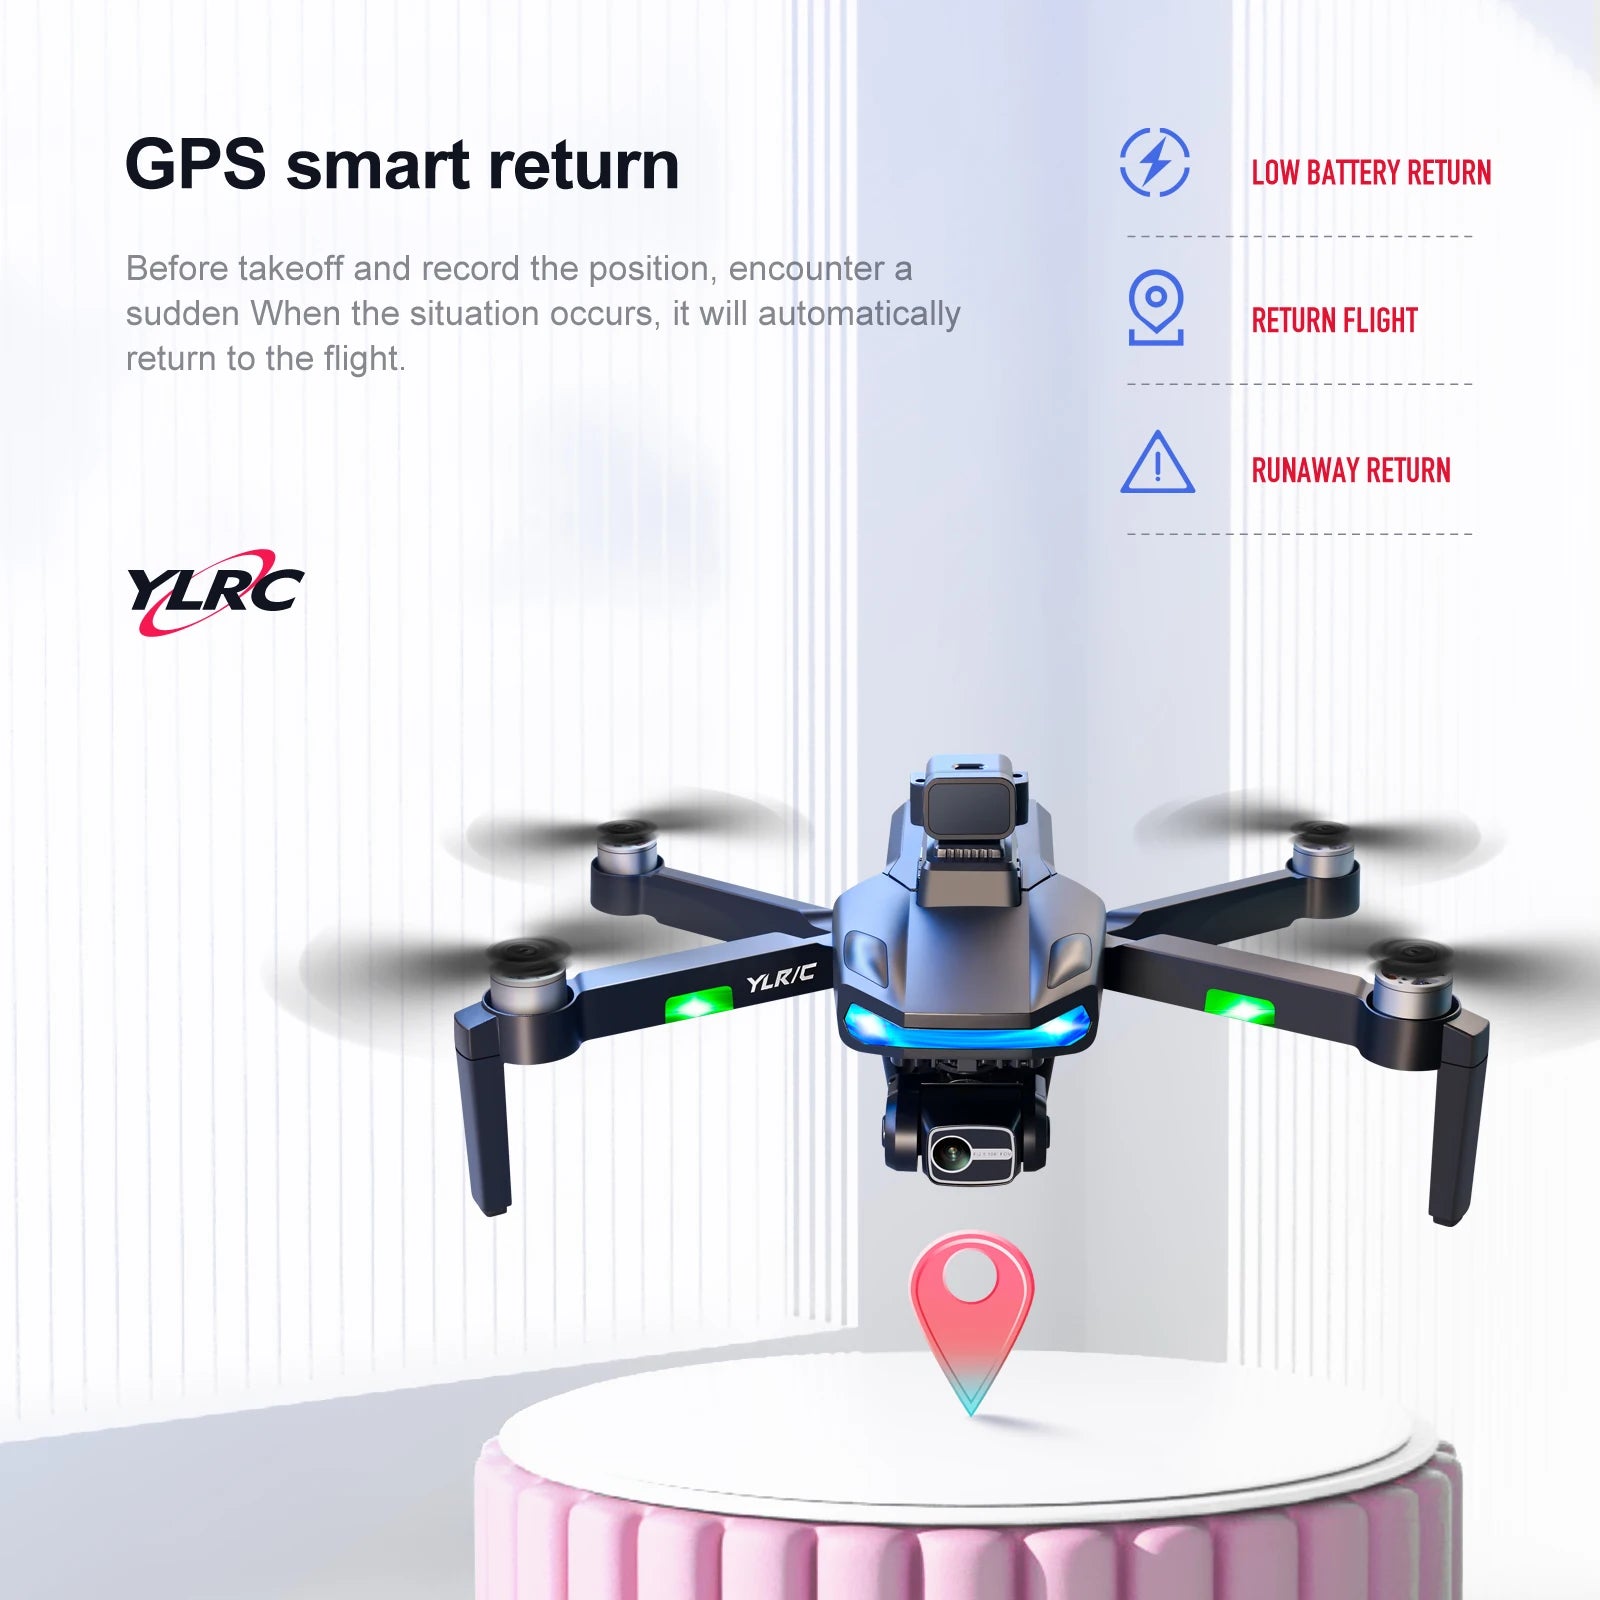 S135 Drone, GPS smart return LOW BATTERY RETURN Before takeoff and record the position